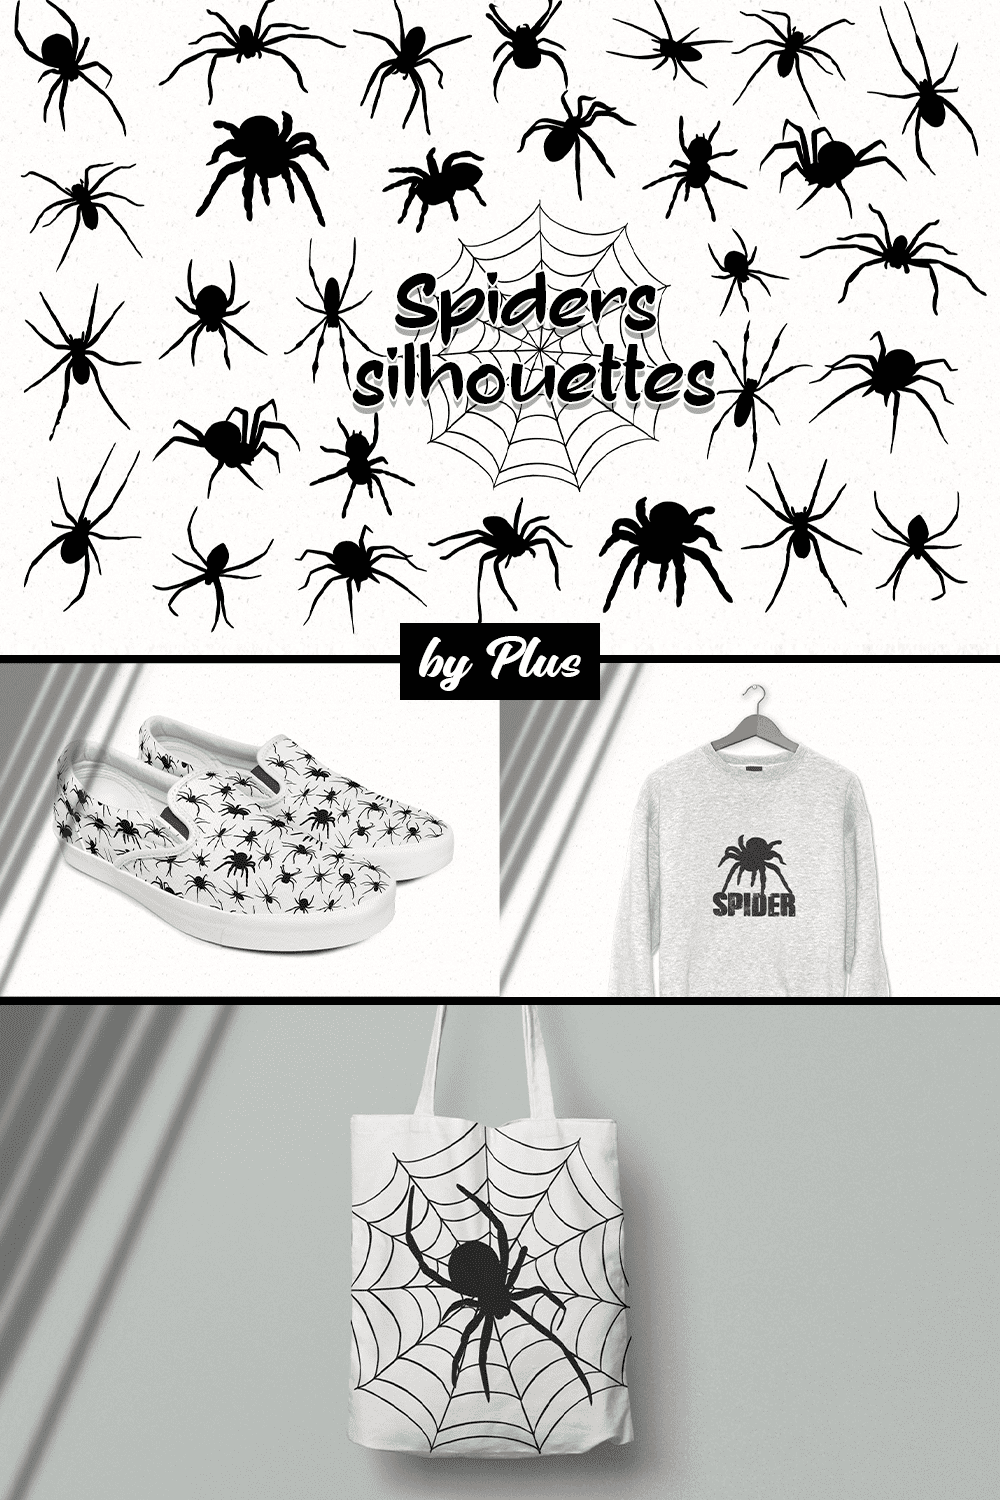 Black and white spiders illustrations.